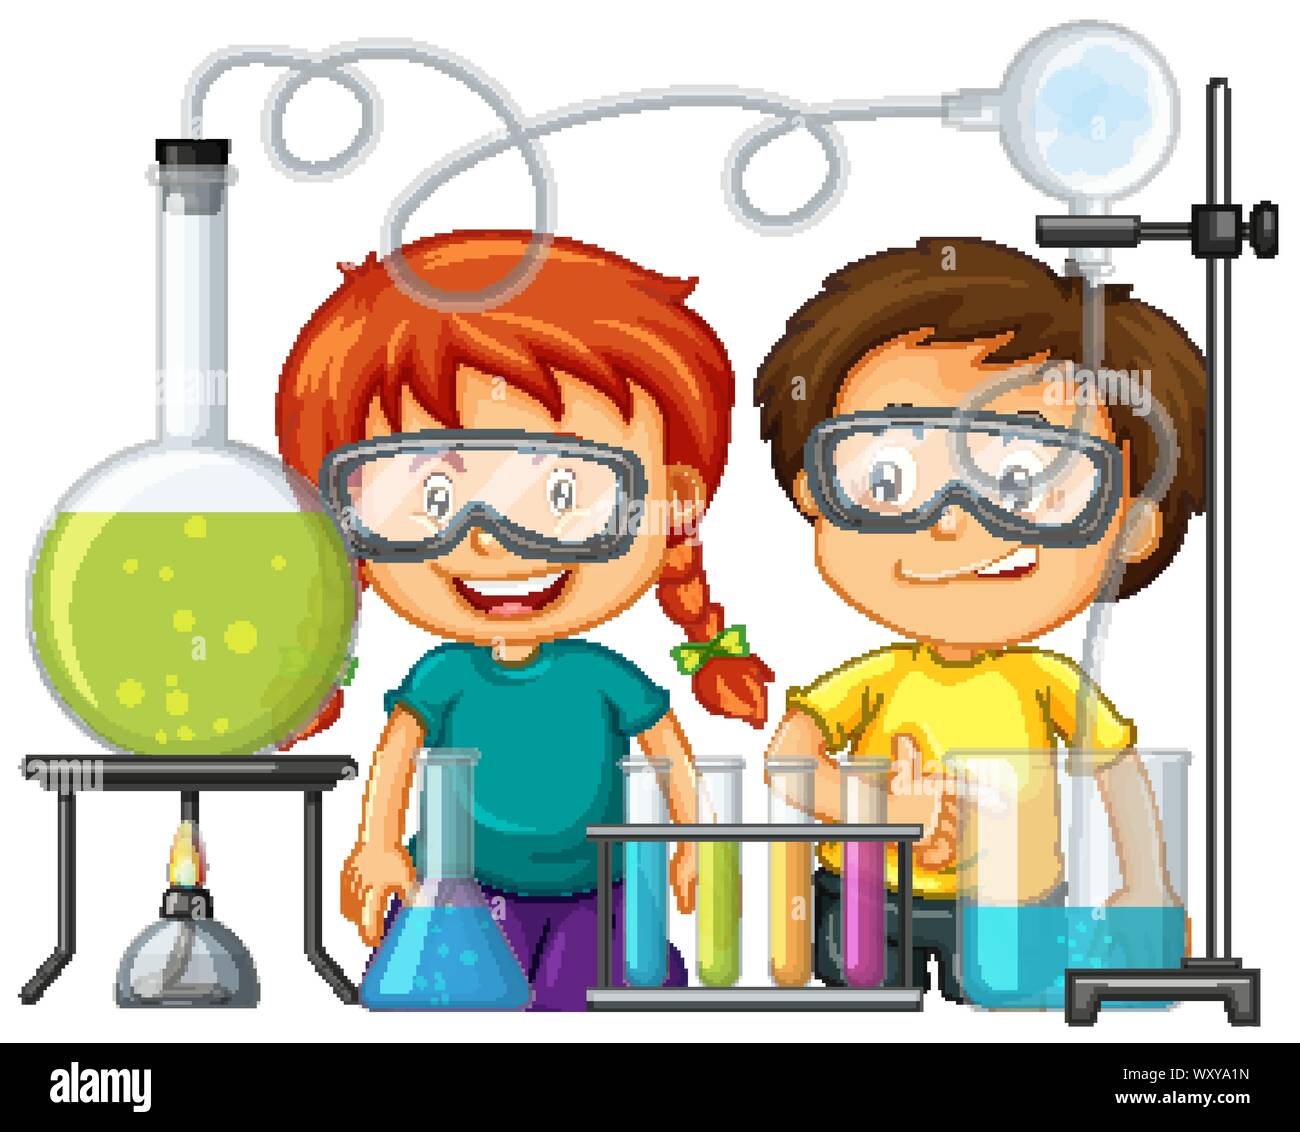 Scientist doing experiment in science lab illustration Stock Vector